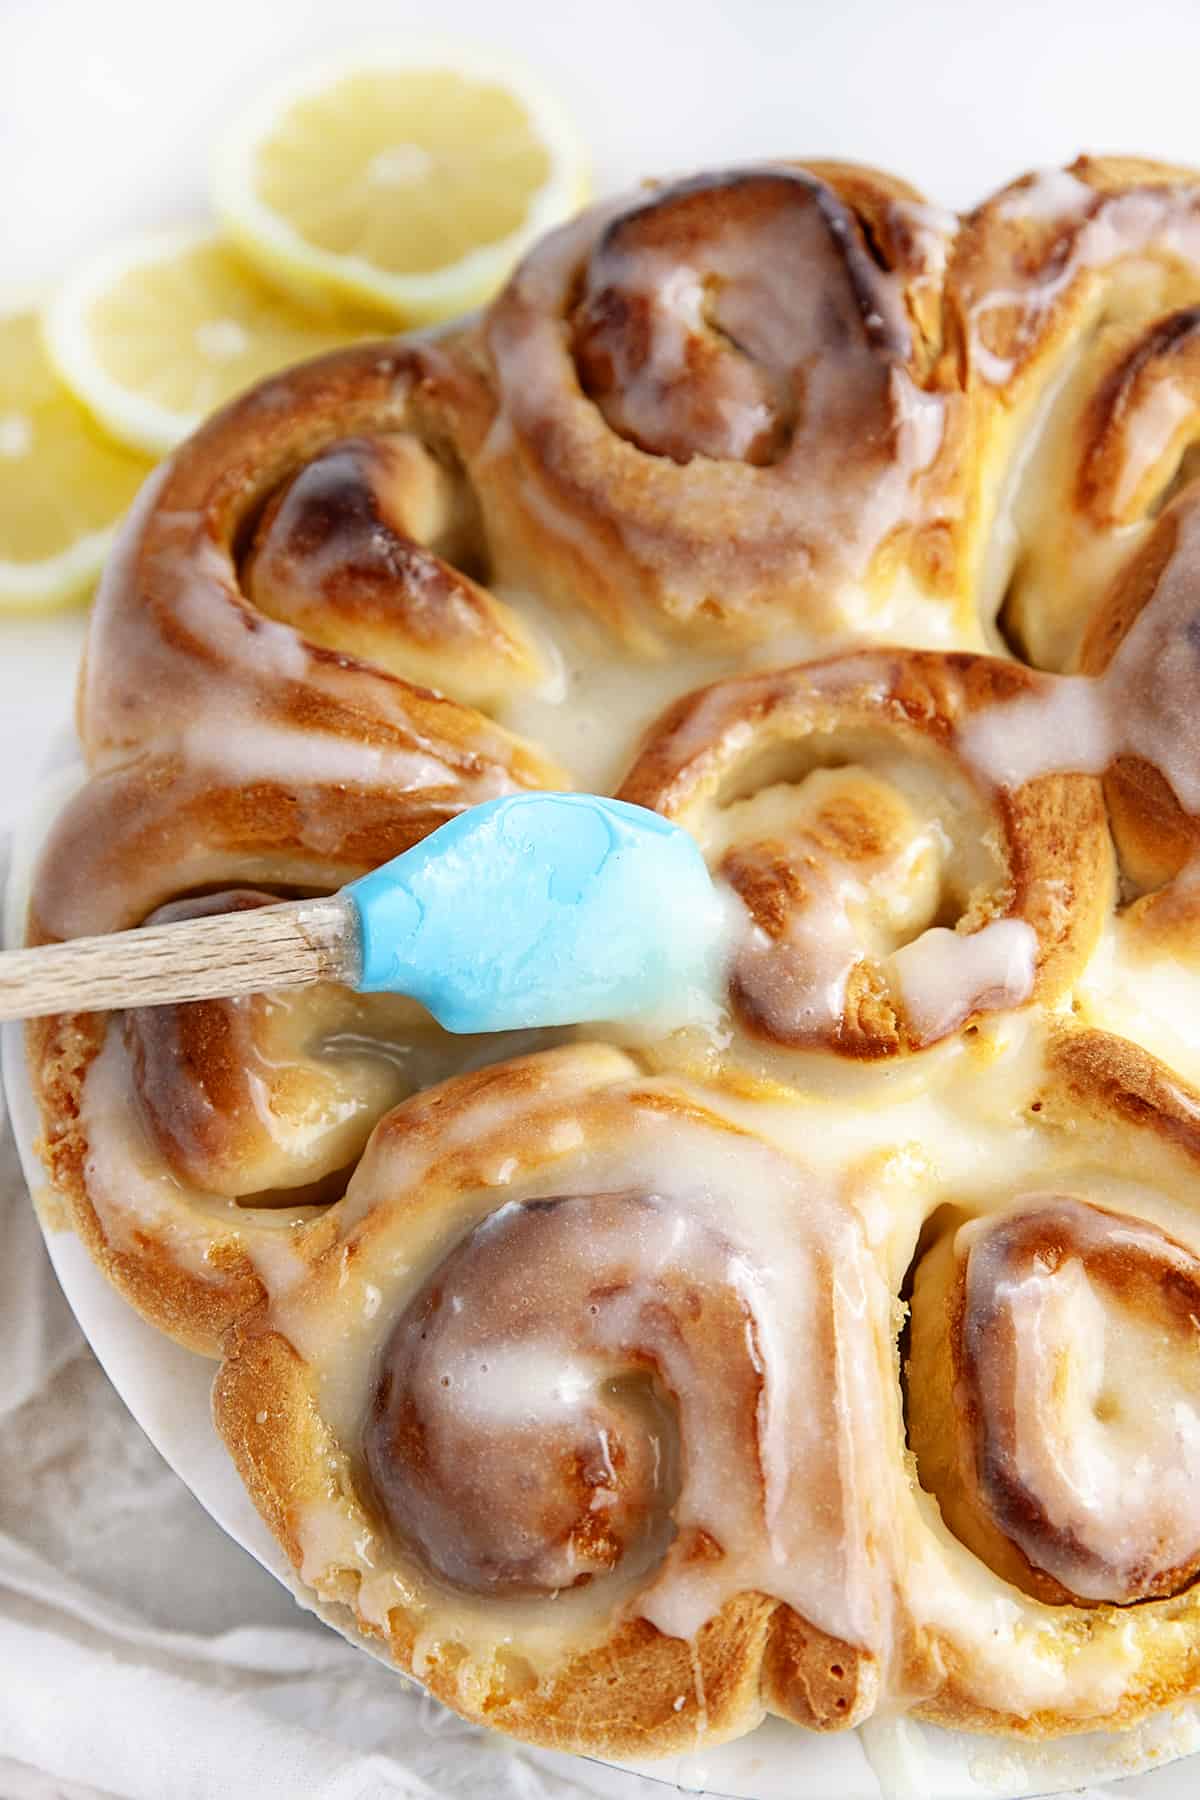  A teal colored spatula spreading on the glaze to the sweet rolls. 